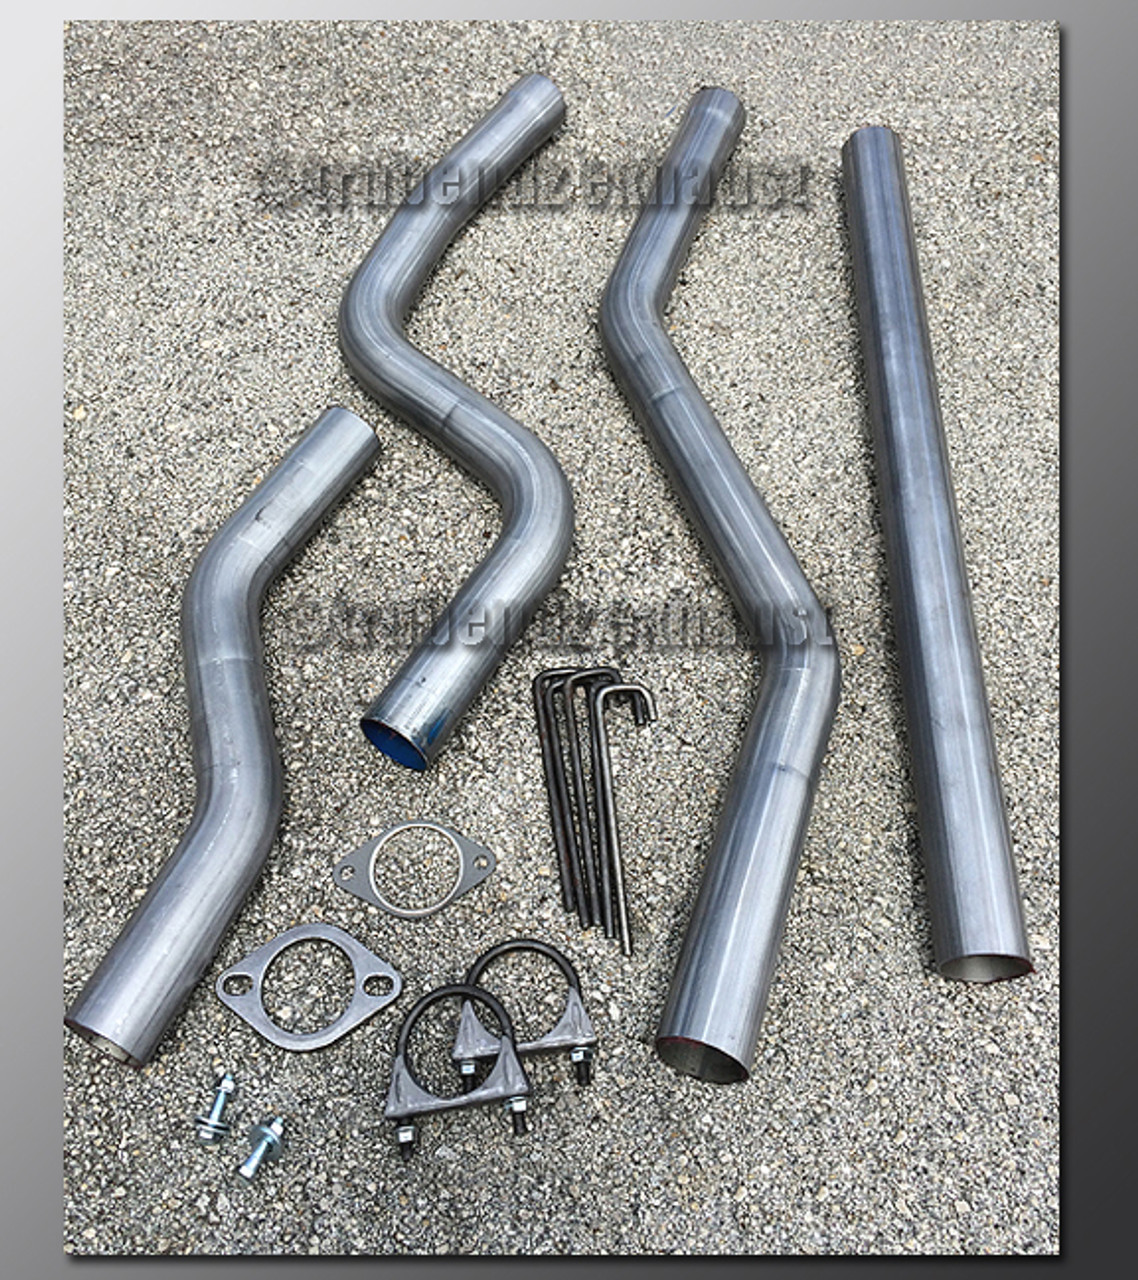 00-07 Ford Focus Exhaust Tubing - 3.0 Inch Aluminized